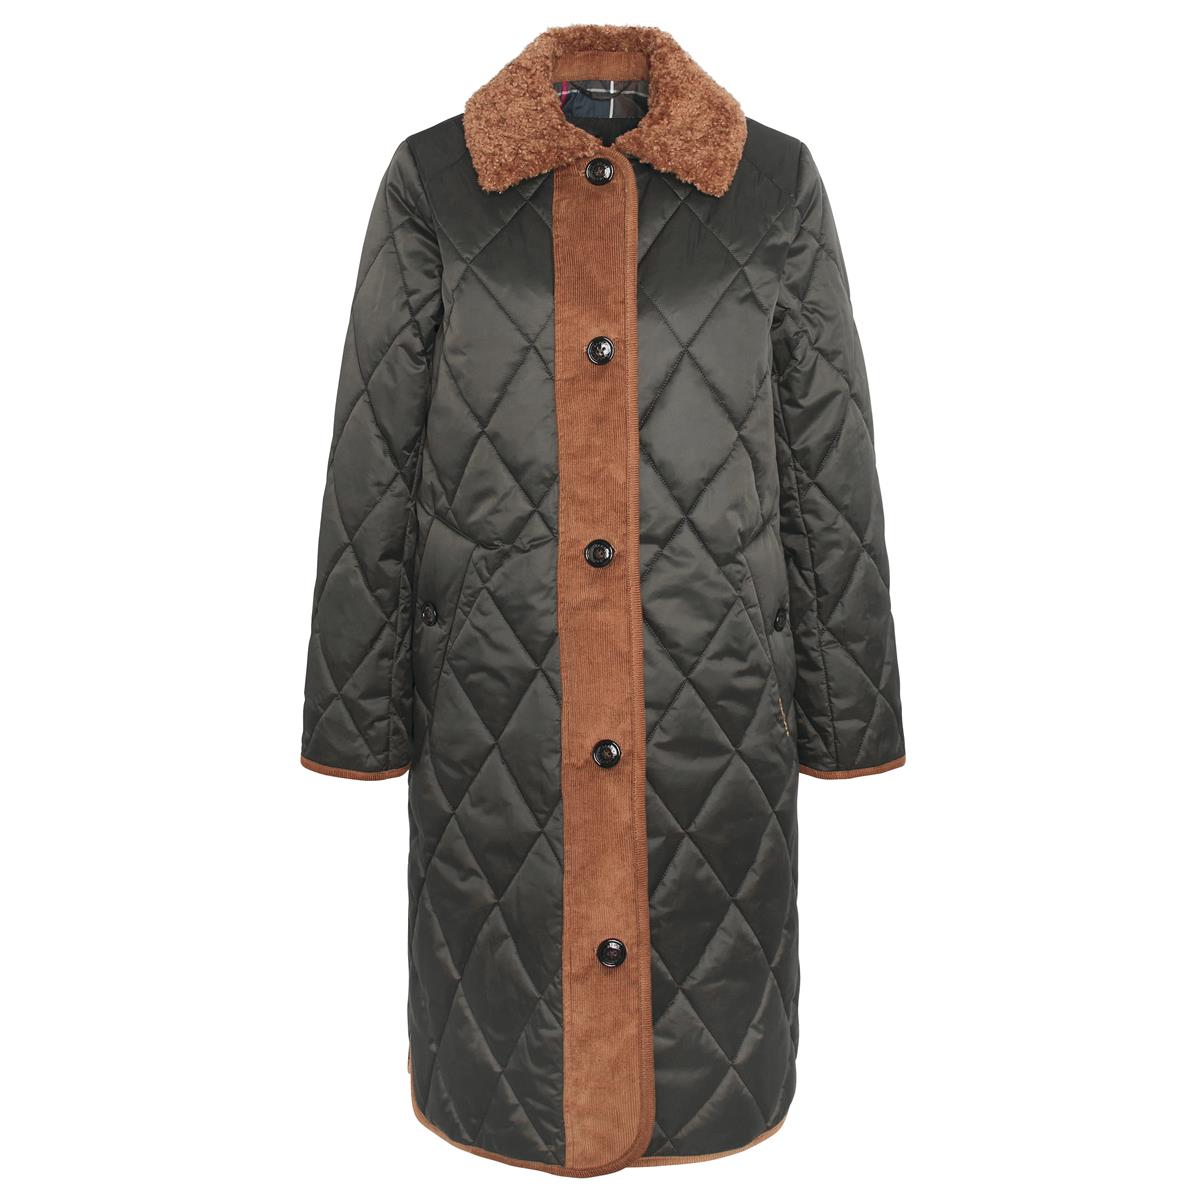 How long is the Barbour Mulgrave Quilt Jacket?